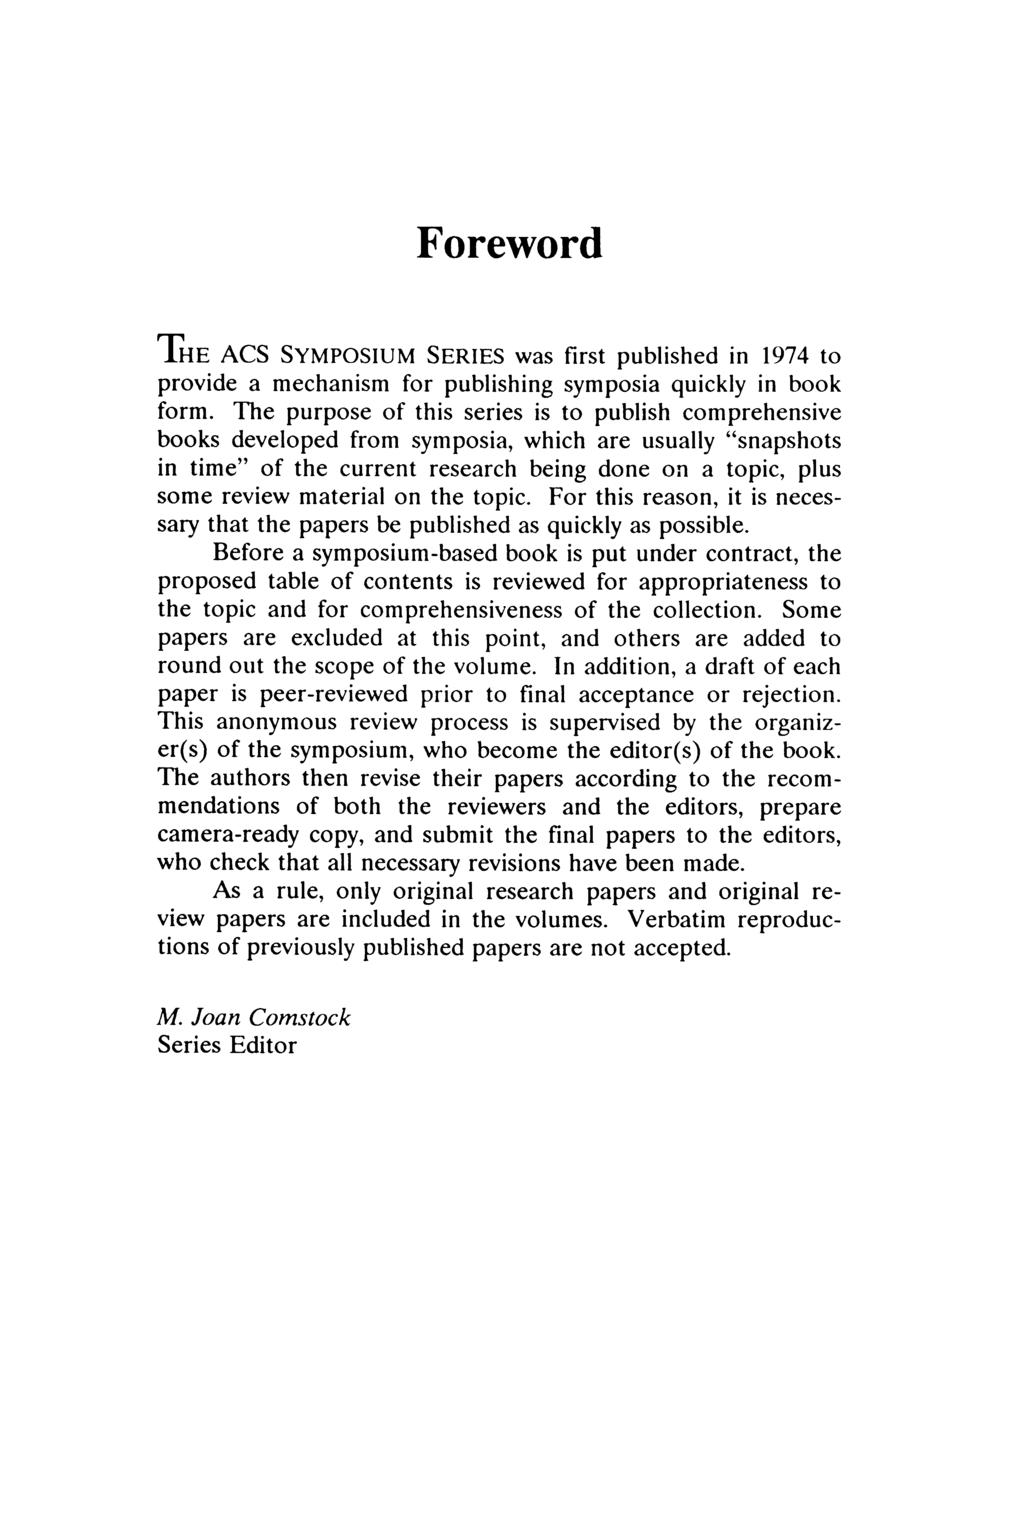 Foreword IHE ACS SYMPOSIUM SERIES was first published in 1974 to provide a mechanism for publishing symposia quickly in book form.